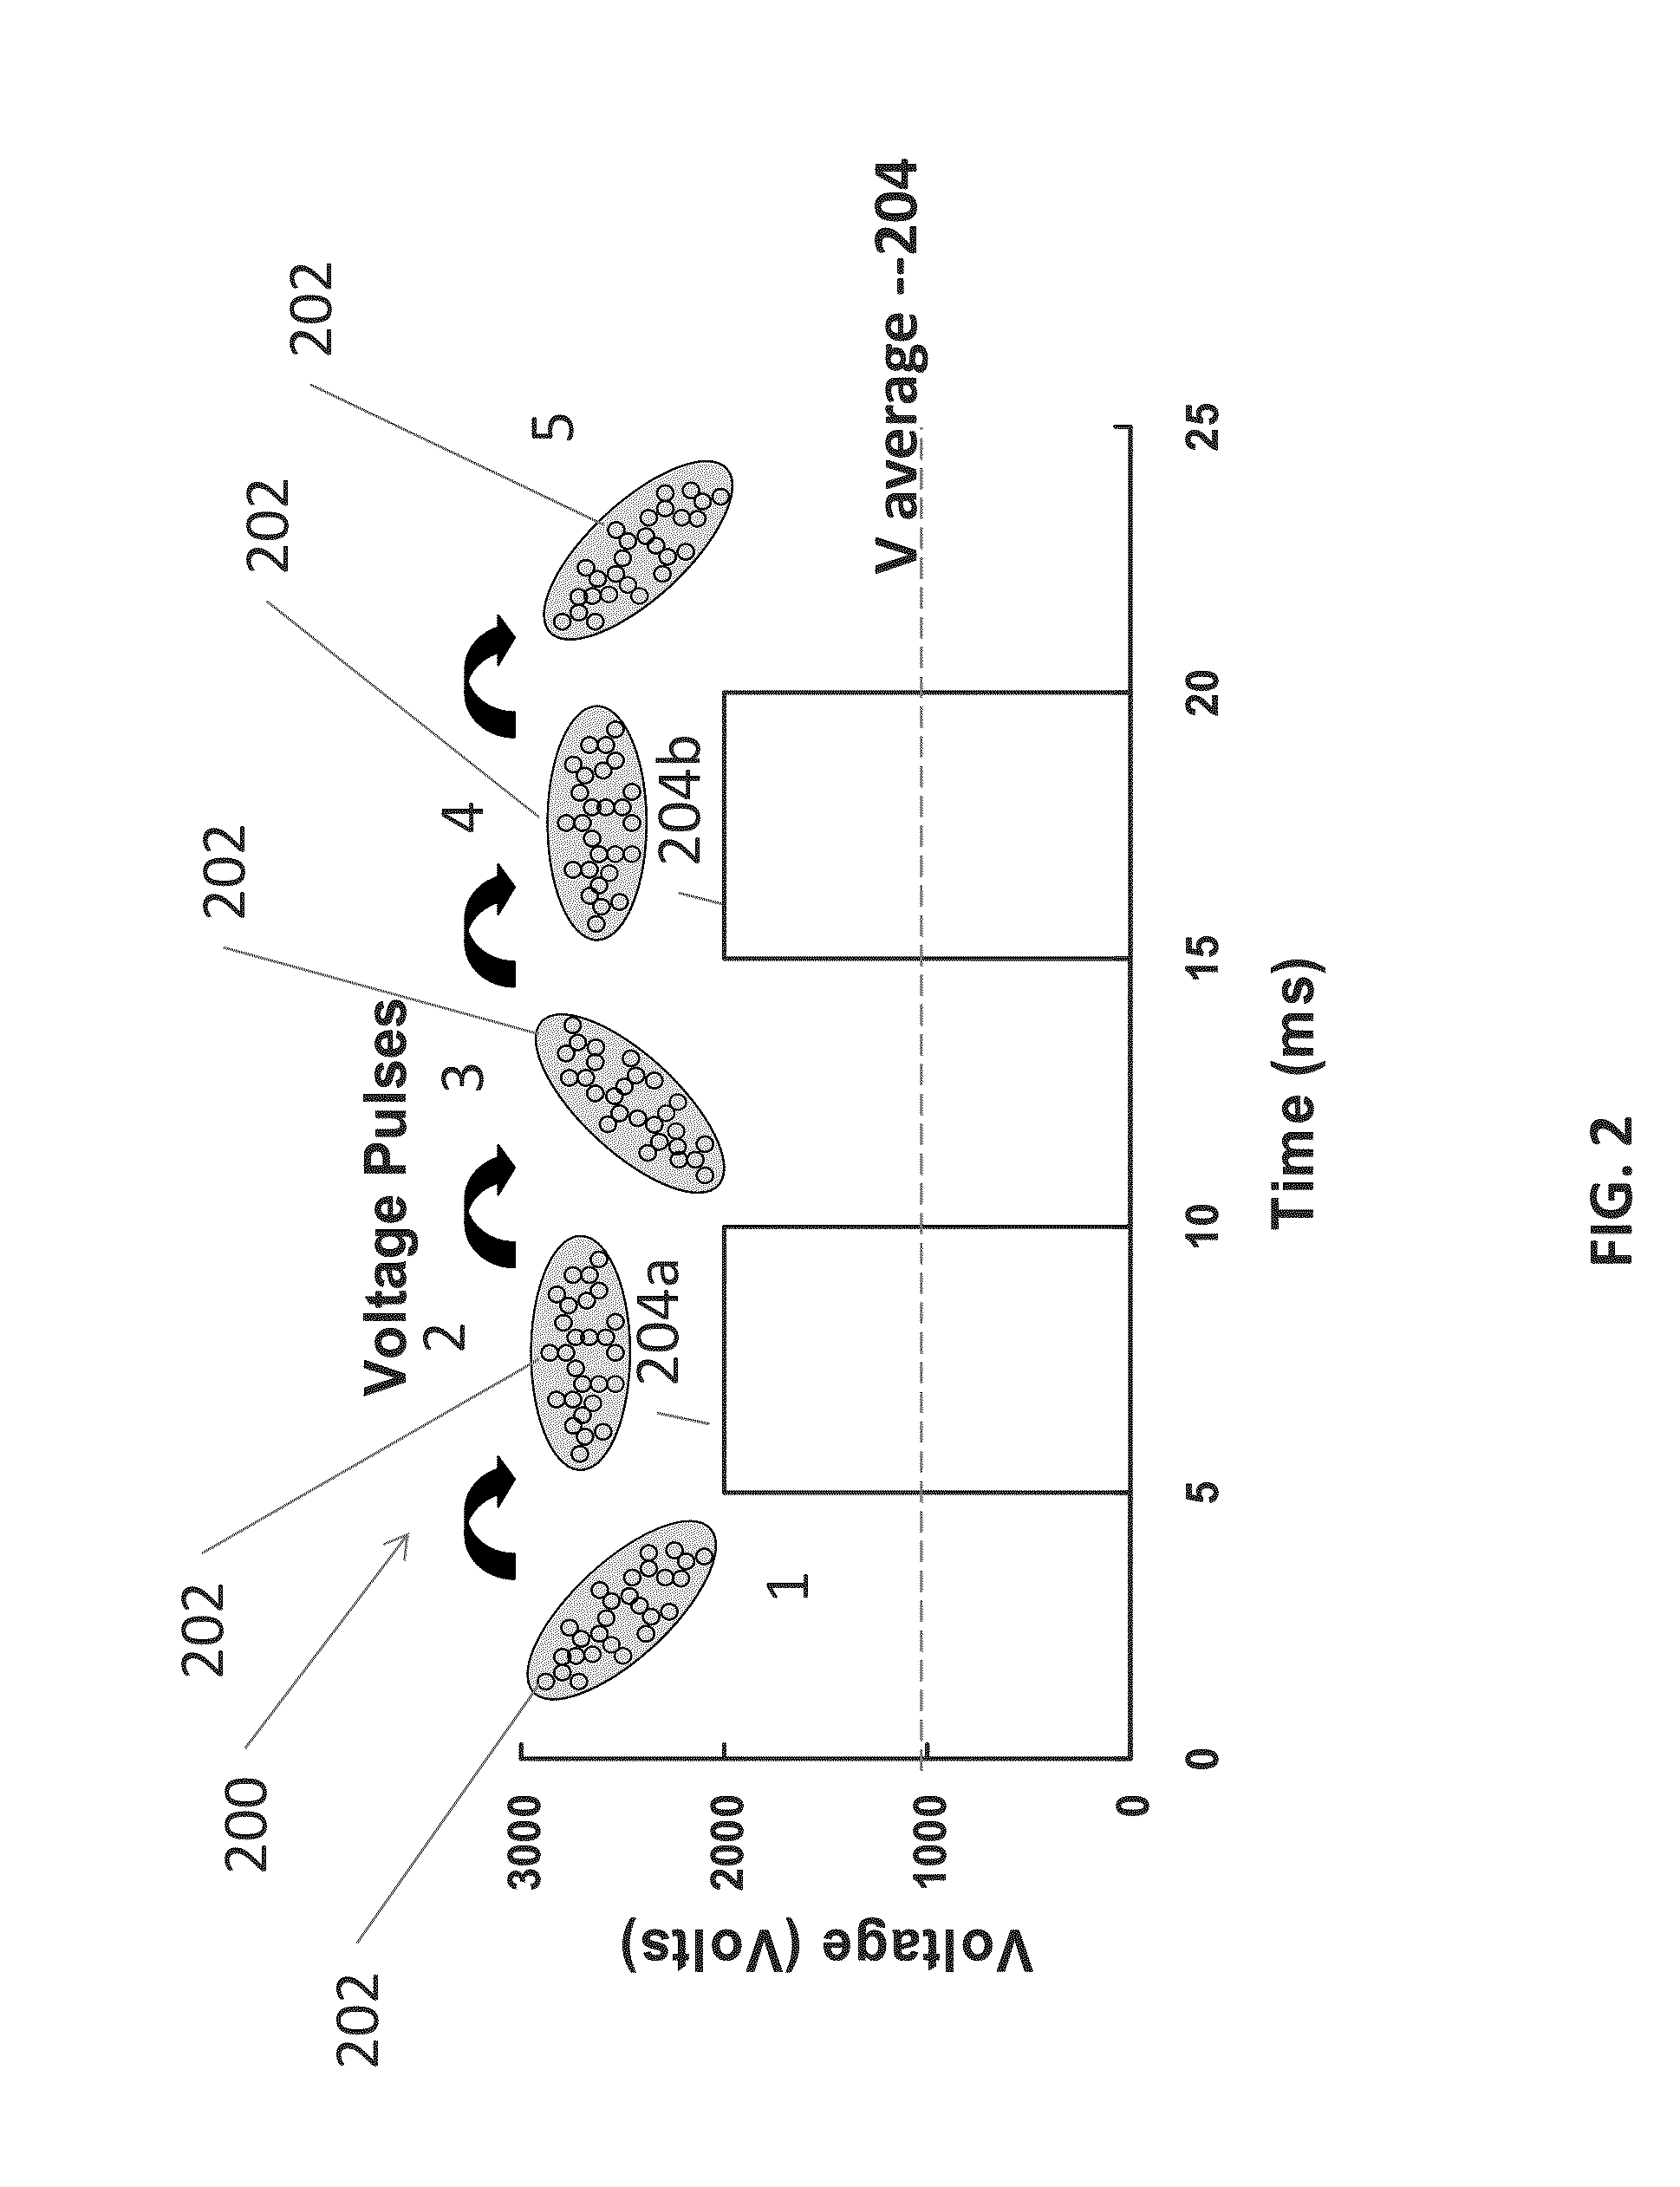 Pulsed-field differential mobility analyzer system and method for separating particles and  measuring shape parameters for non-spherical particles